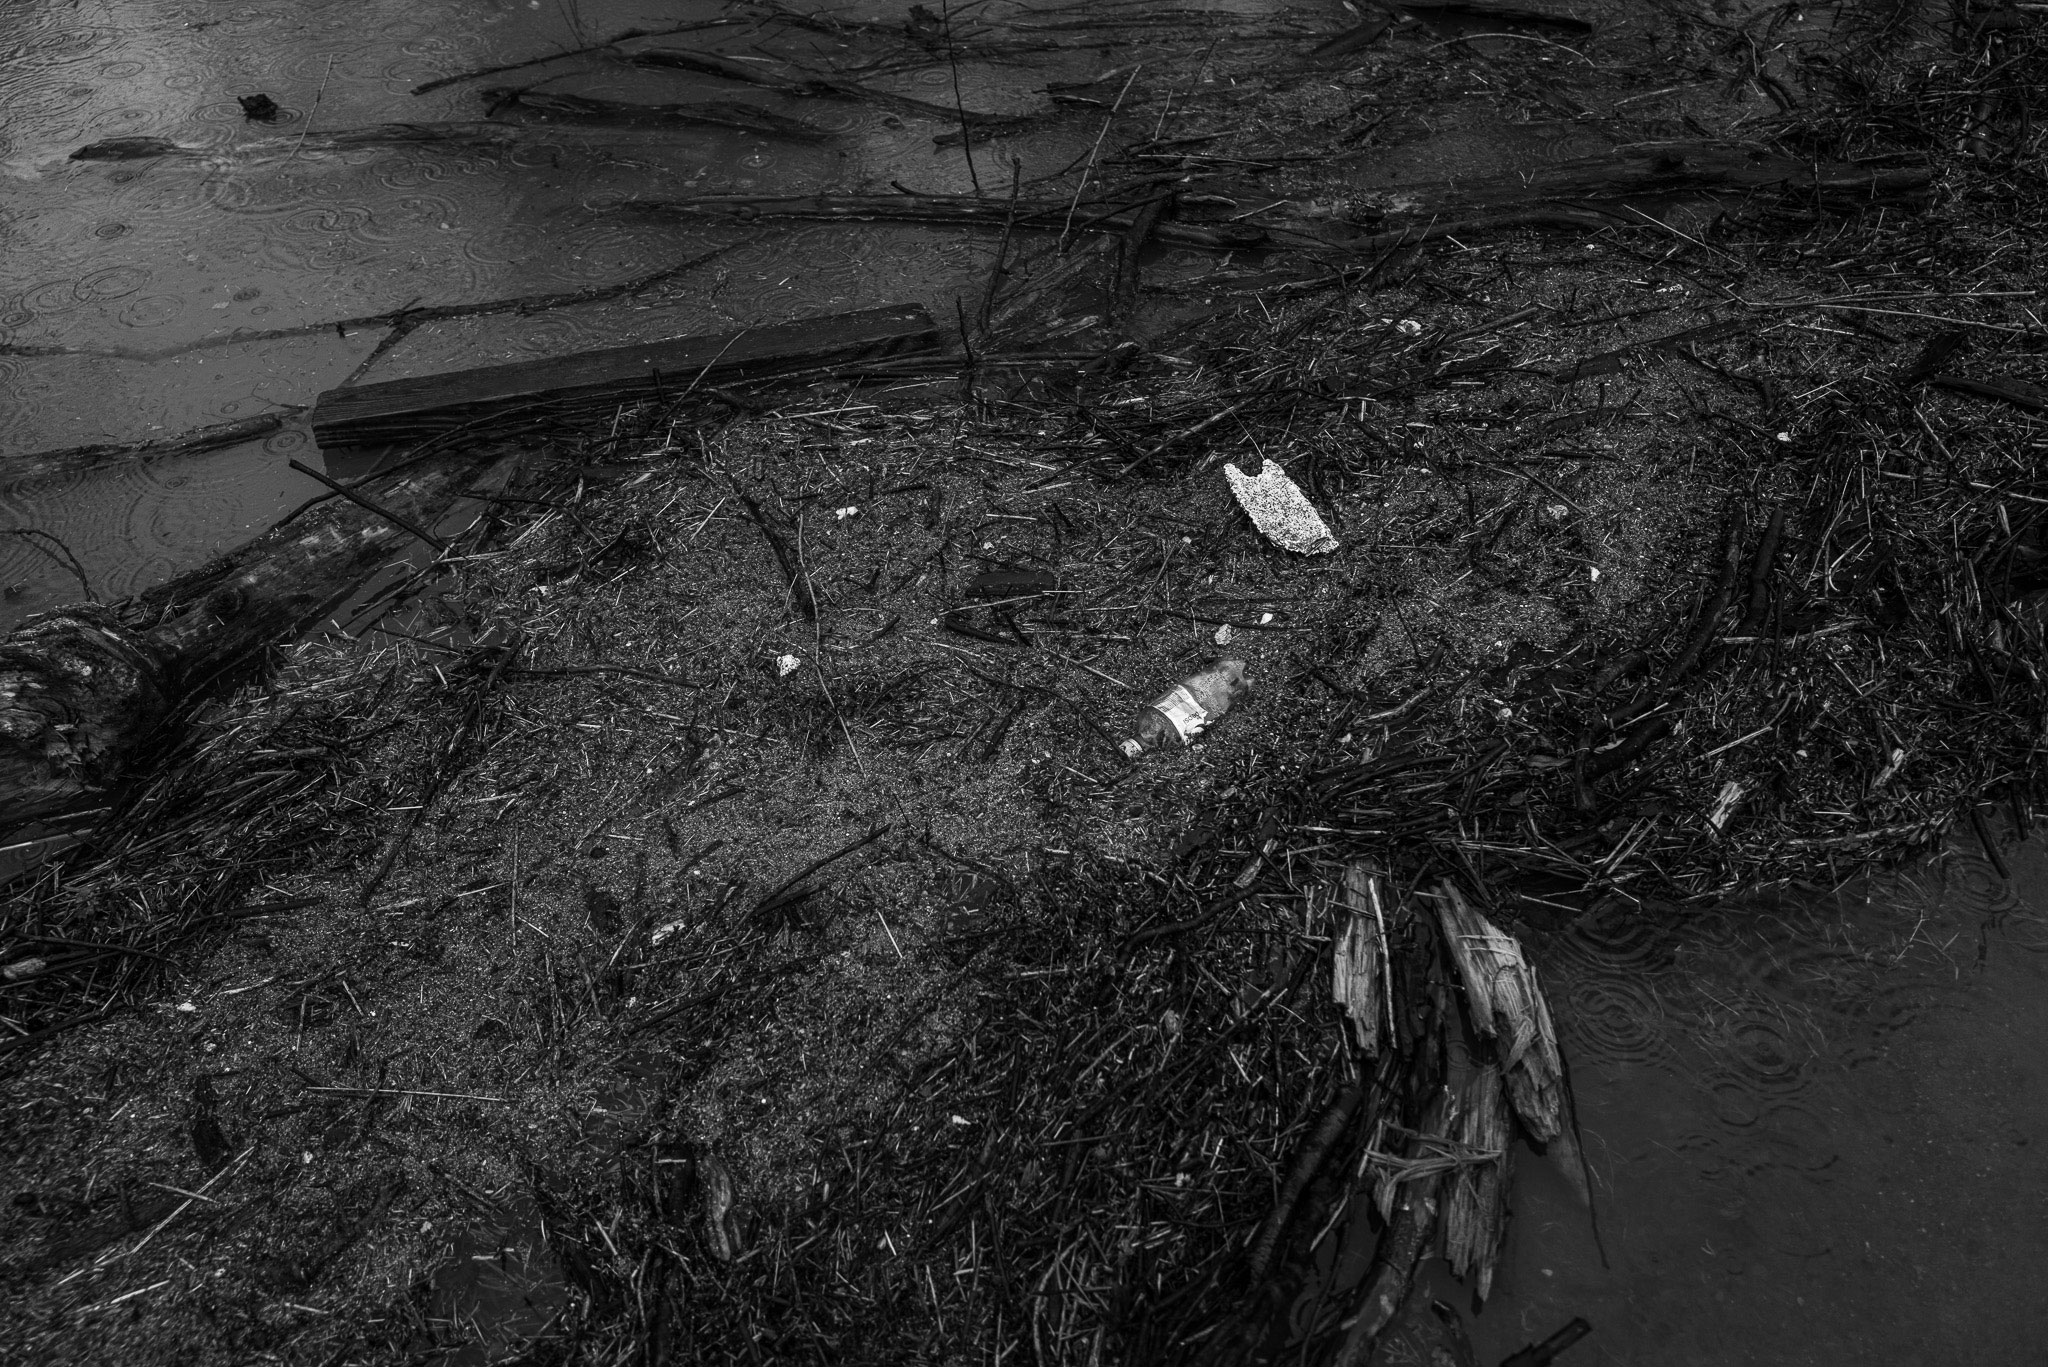 Pollution and debris in flood water near Haw Bridge on the River Severn